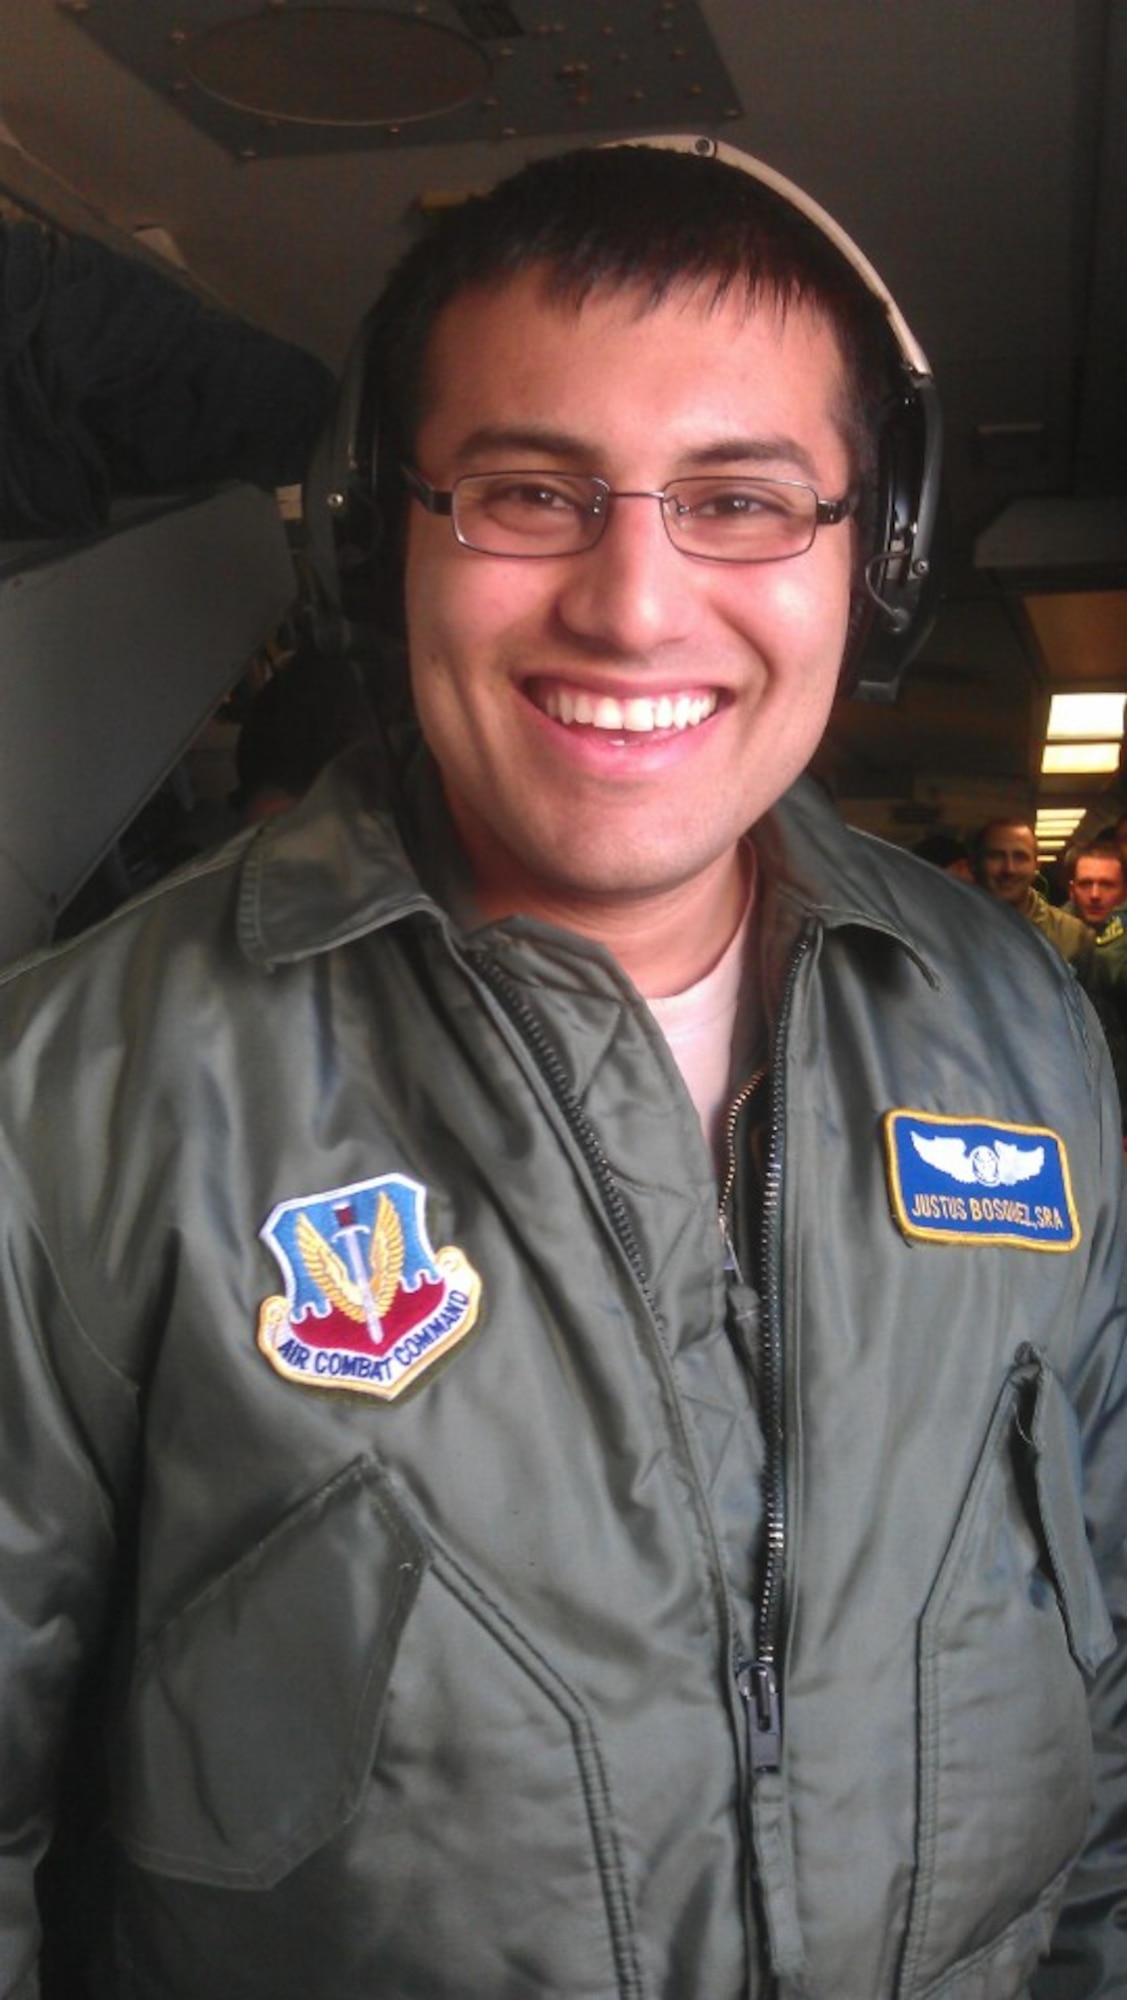 After receiving paperwork putting him back in flying status, Senior Airman Justus Bosquez took his first flight as an amputee March 25. The Airman, an E-3 air surveillance technician with the 965th Airborne Air Control Squadron, had his left leg amputated after a hit-and-run motorcycle accident in June 2011. (Courtesy photo) 